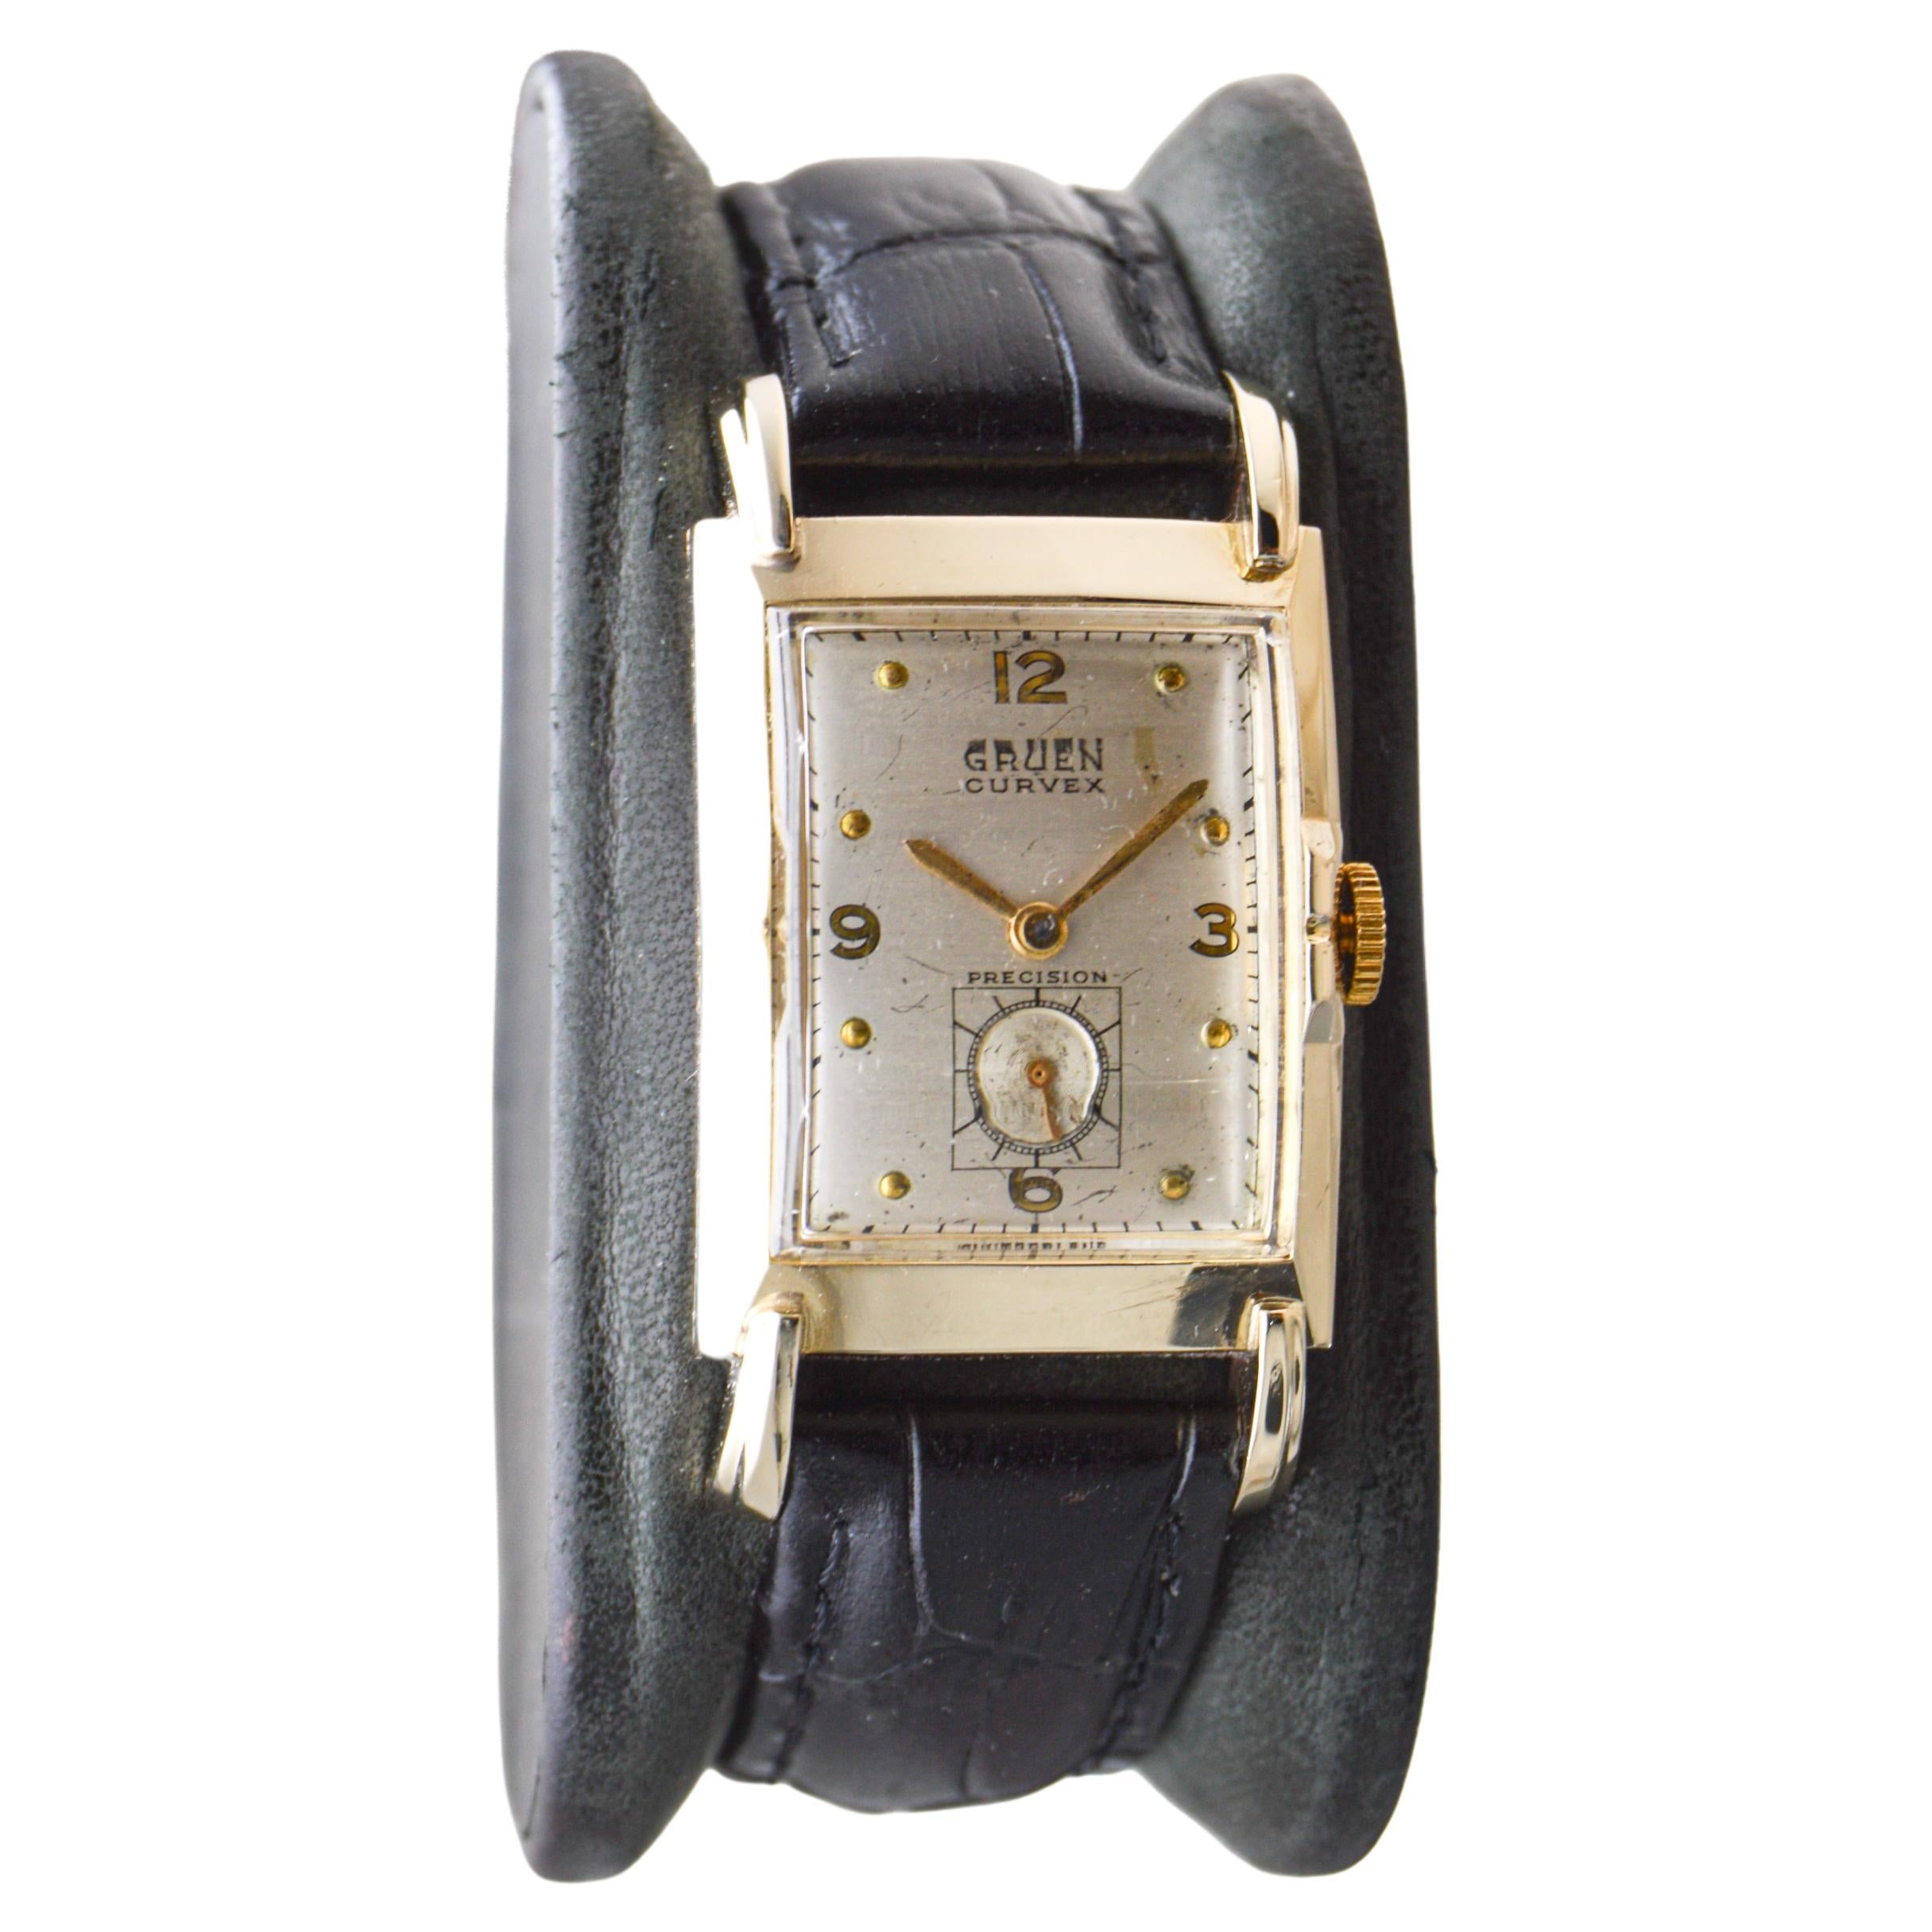 FACTORY / HOUSE: Gruen Watch Company
STYLE / REFERENCE: Art Deco / Tank Style / Reference 770
METAL / MATERIAL: Yellow Gold Filled
CIRCA / YEAR: 1940's
DIMENSIONS / SIZE: Length 41mm X Width 23mm
MOVEMENT / CALIBER: Manual Winding / 17 Jewels /